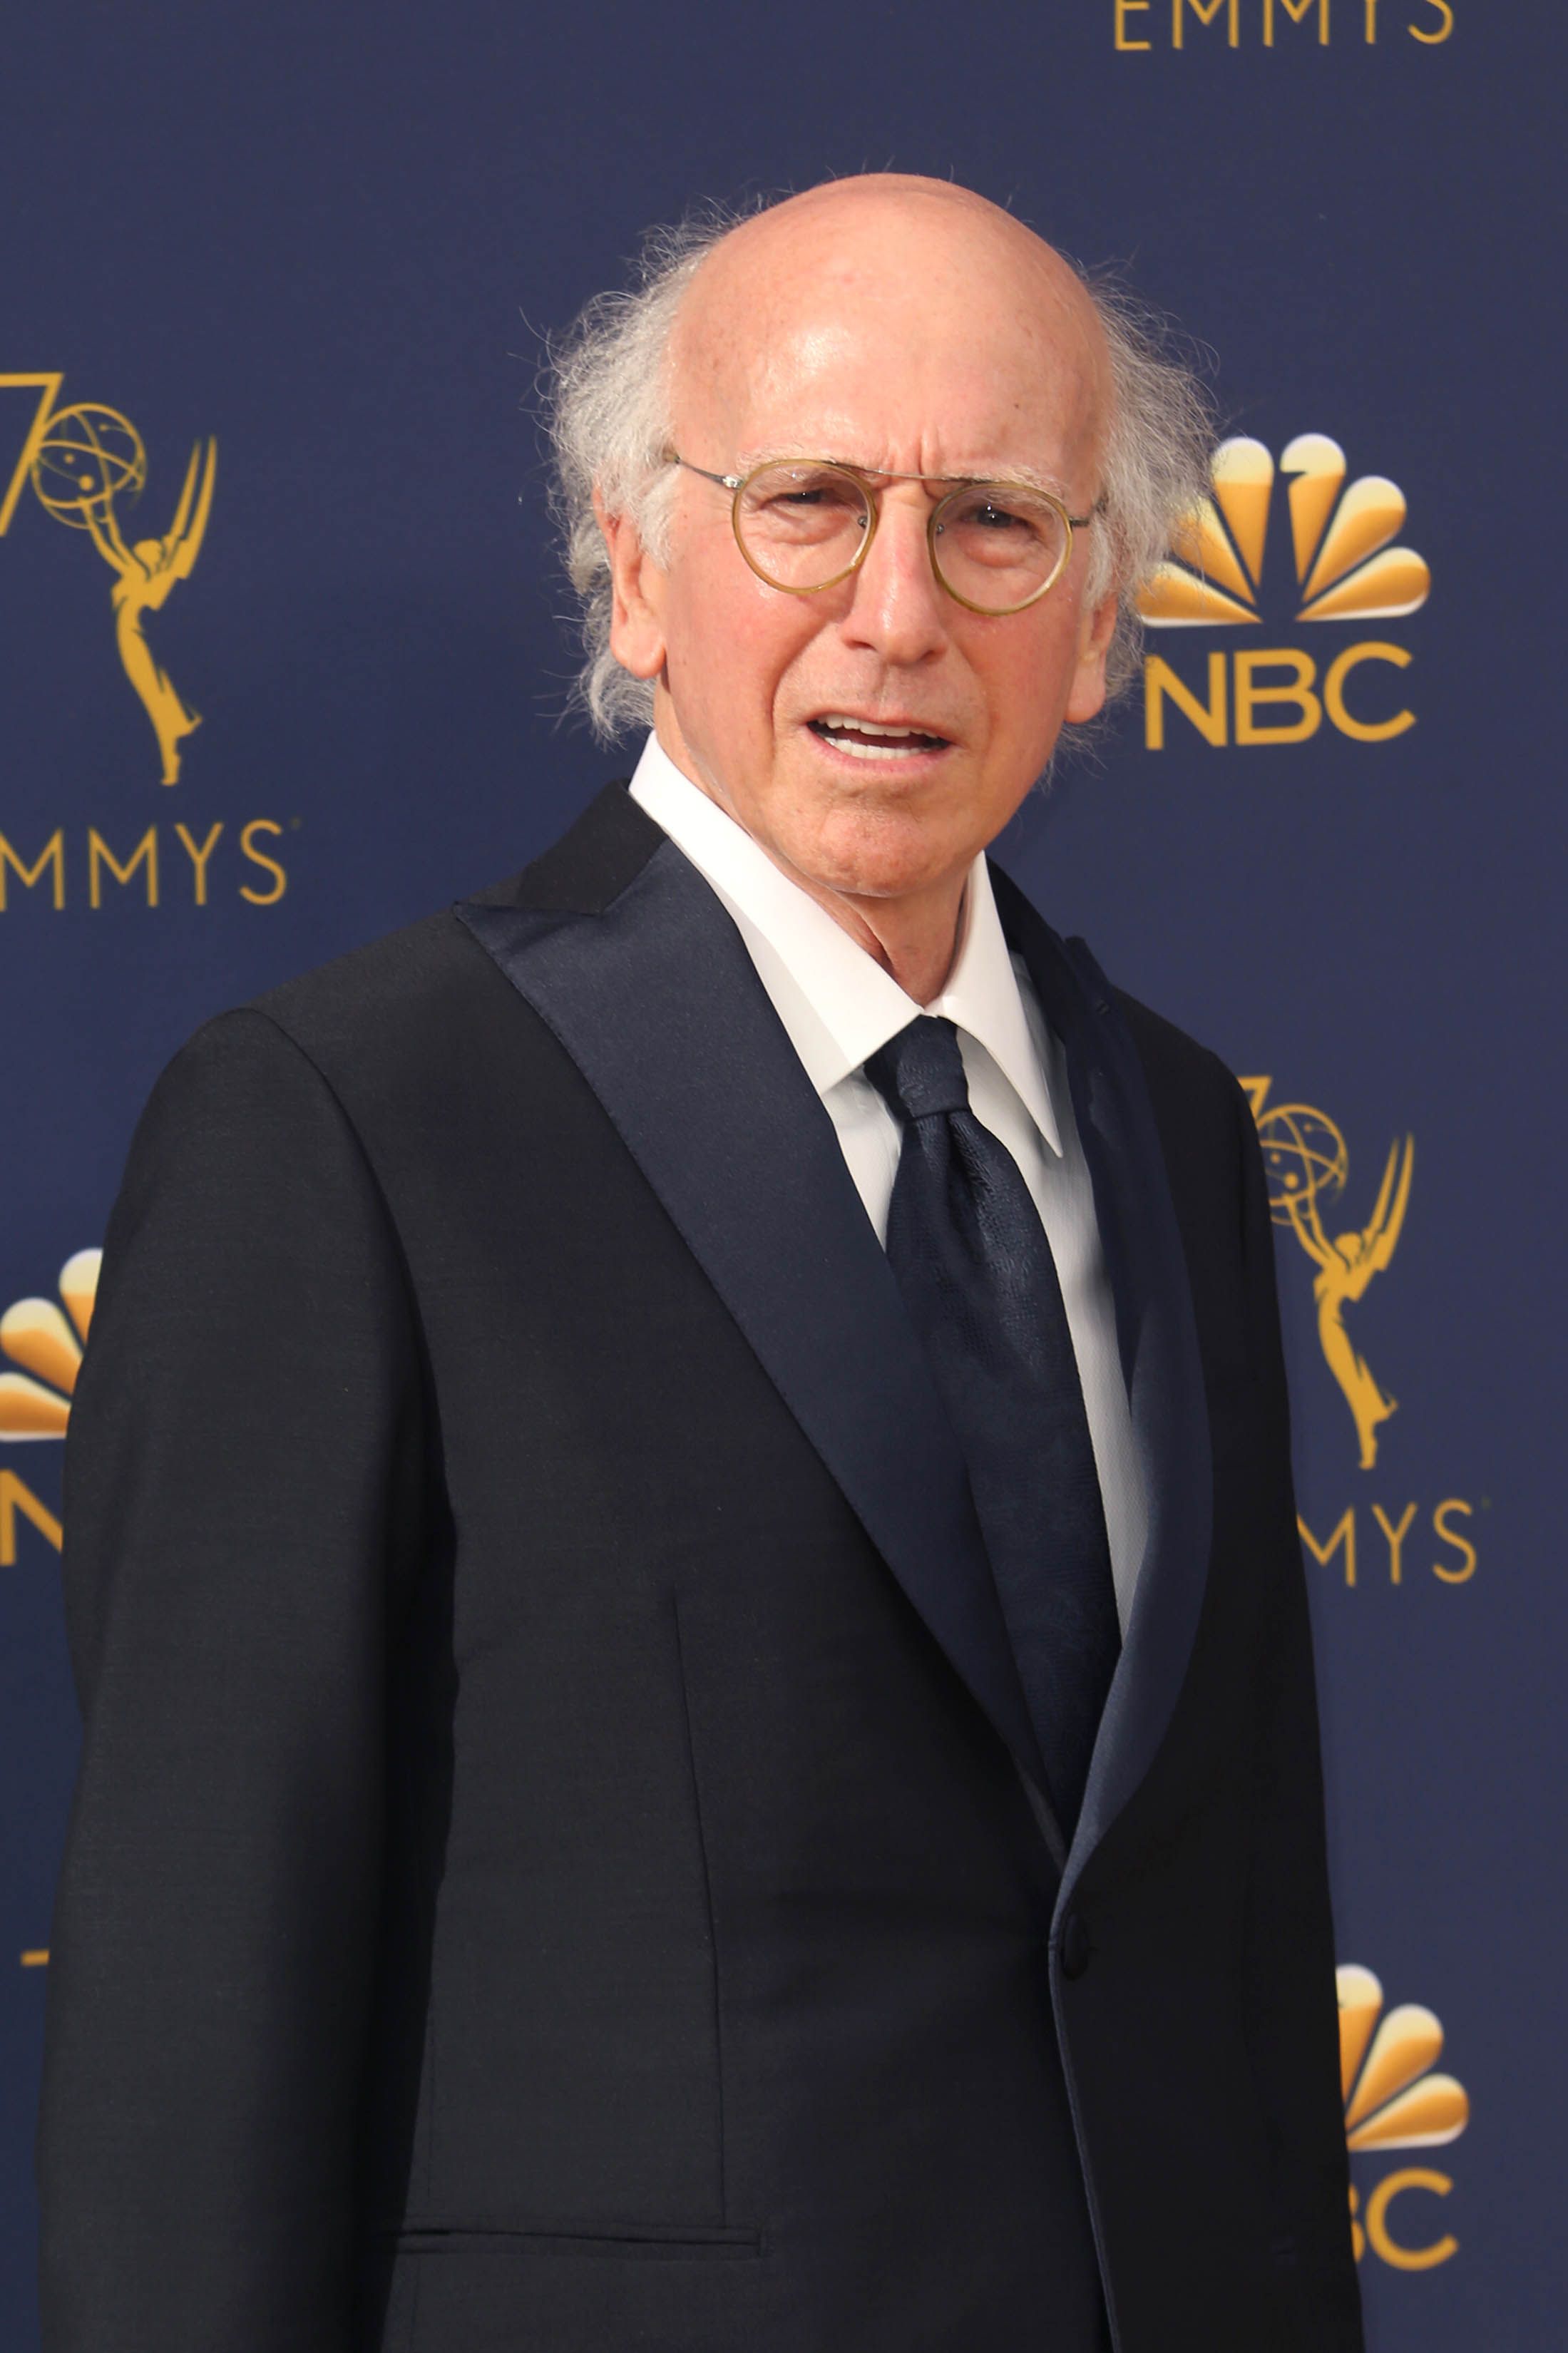 Larry David on the red carpet